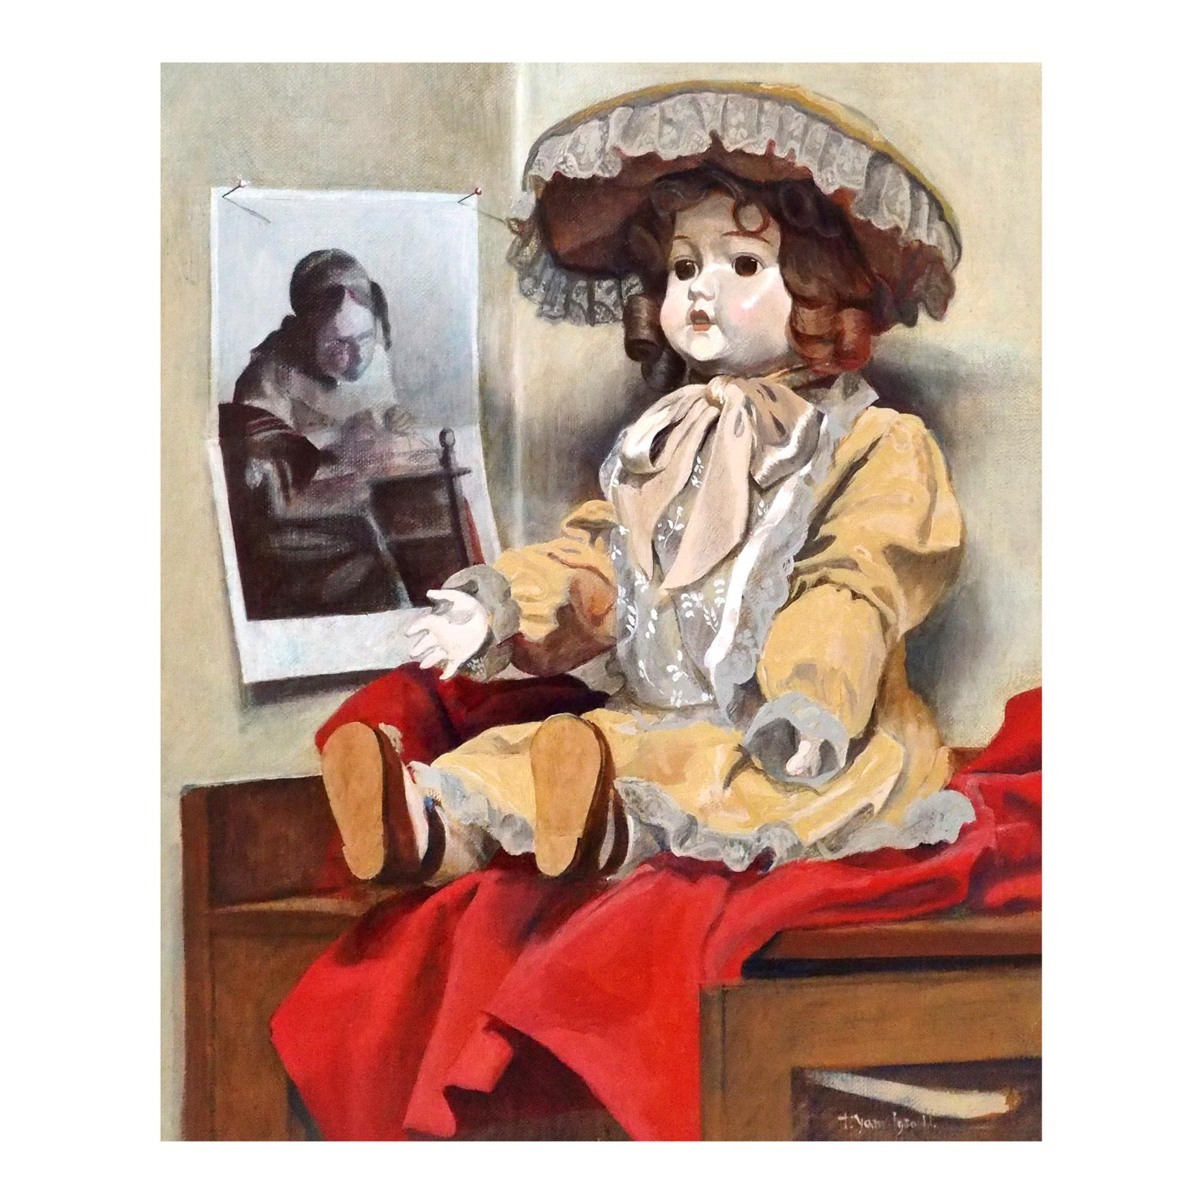 Toru Yamashita Western Doll / Oil painting on canvas pasted on a board, No. 8 / Produced in 1980 / French Doll / 2023 Art Market: 120, 000 yen / Authenticity guaranteed / ENCHANTE, painting, oil painting, still life painting